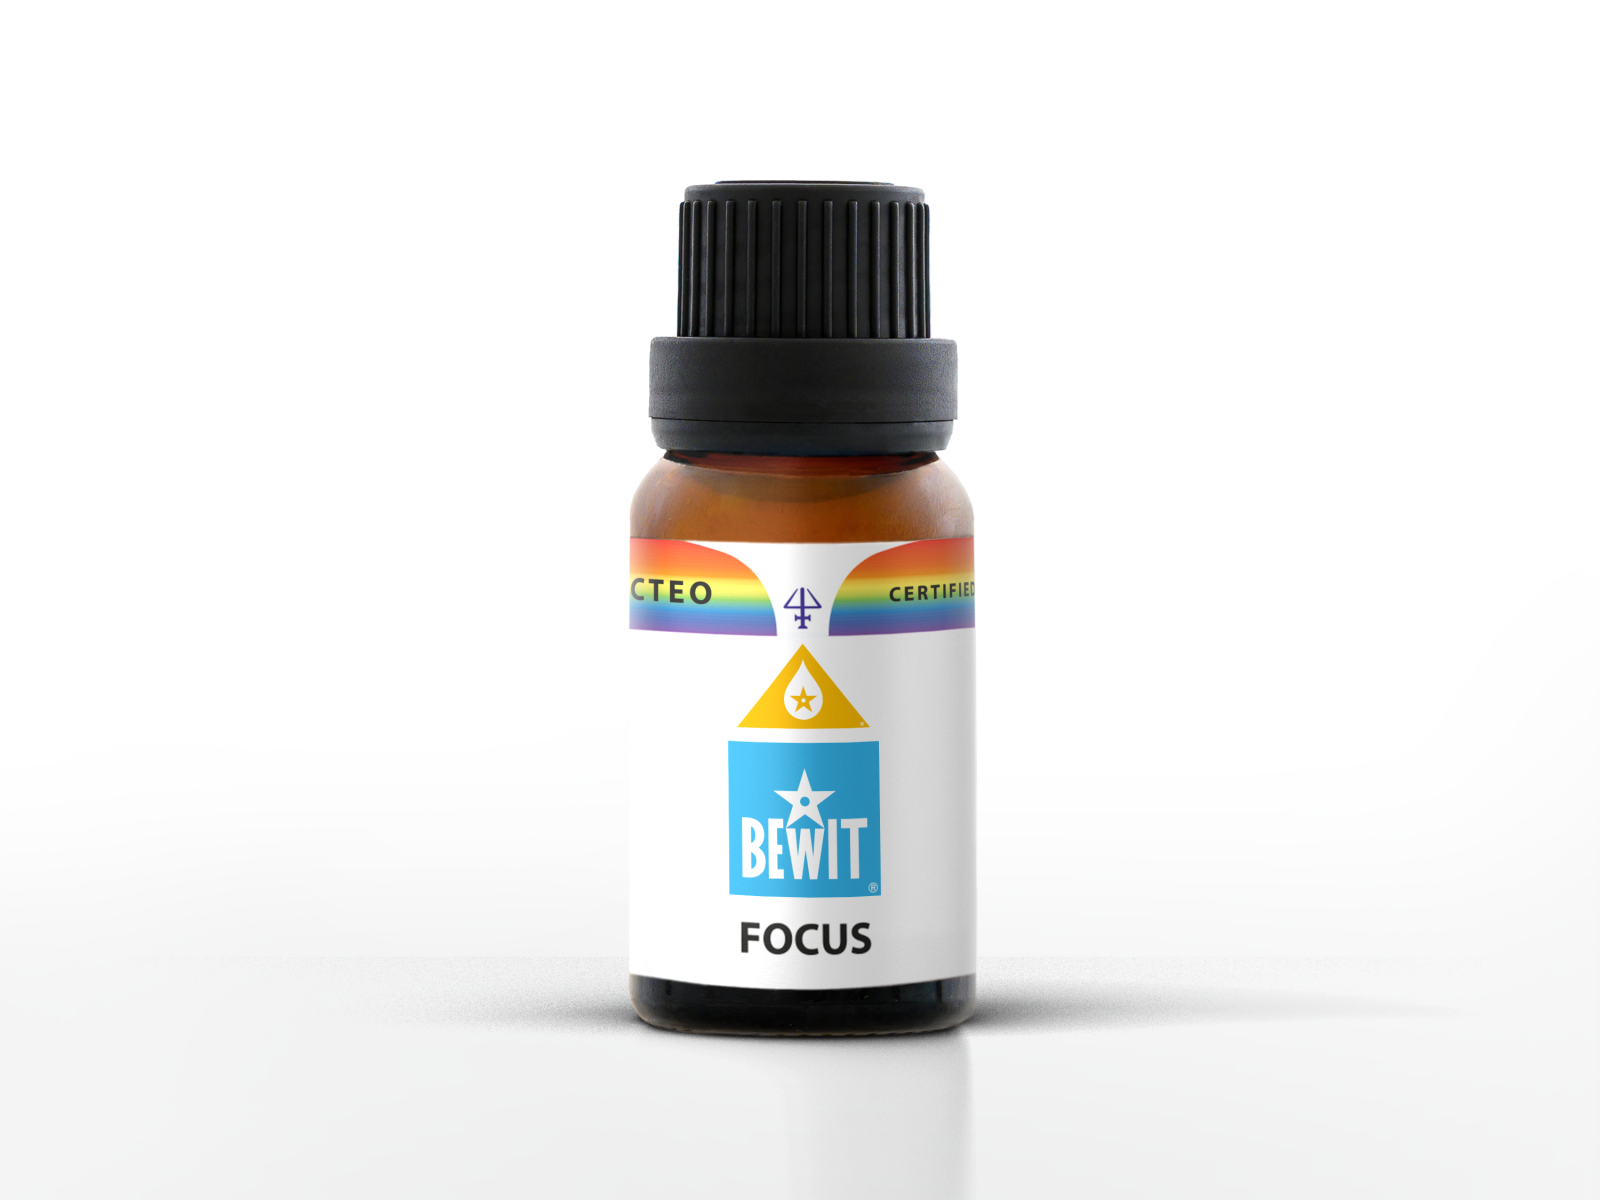 BEWIT FOCUS - A blend of essential oils - 1